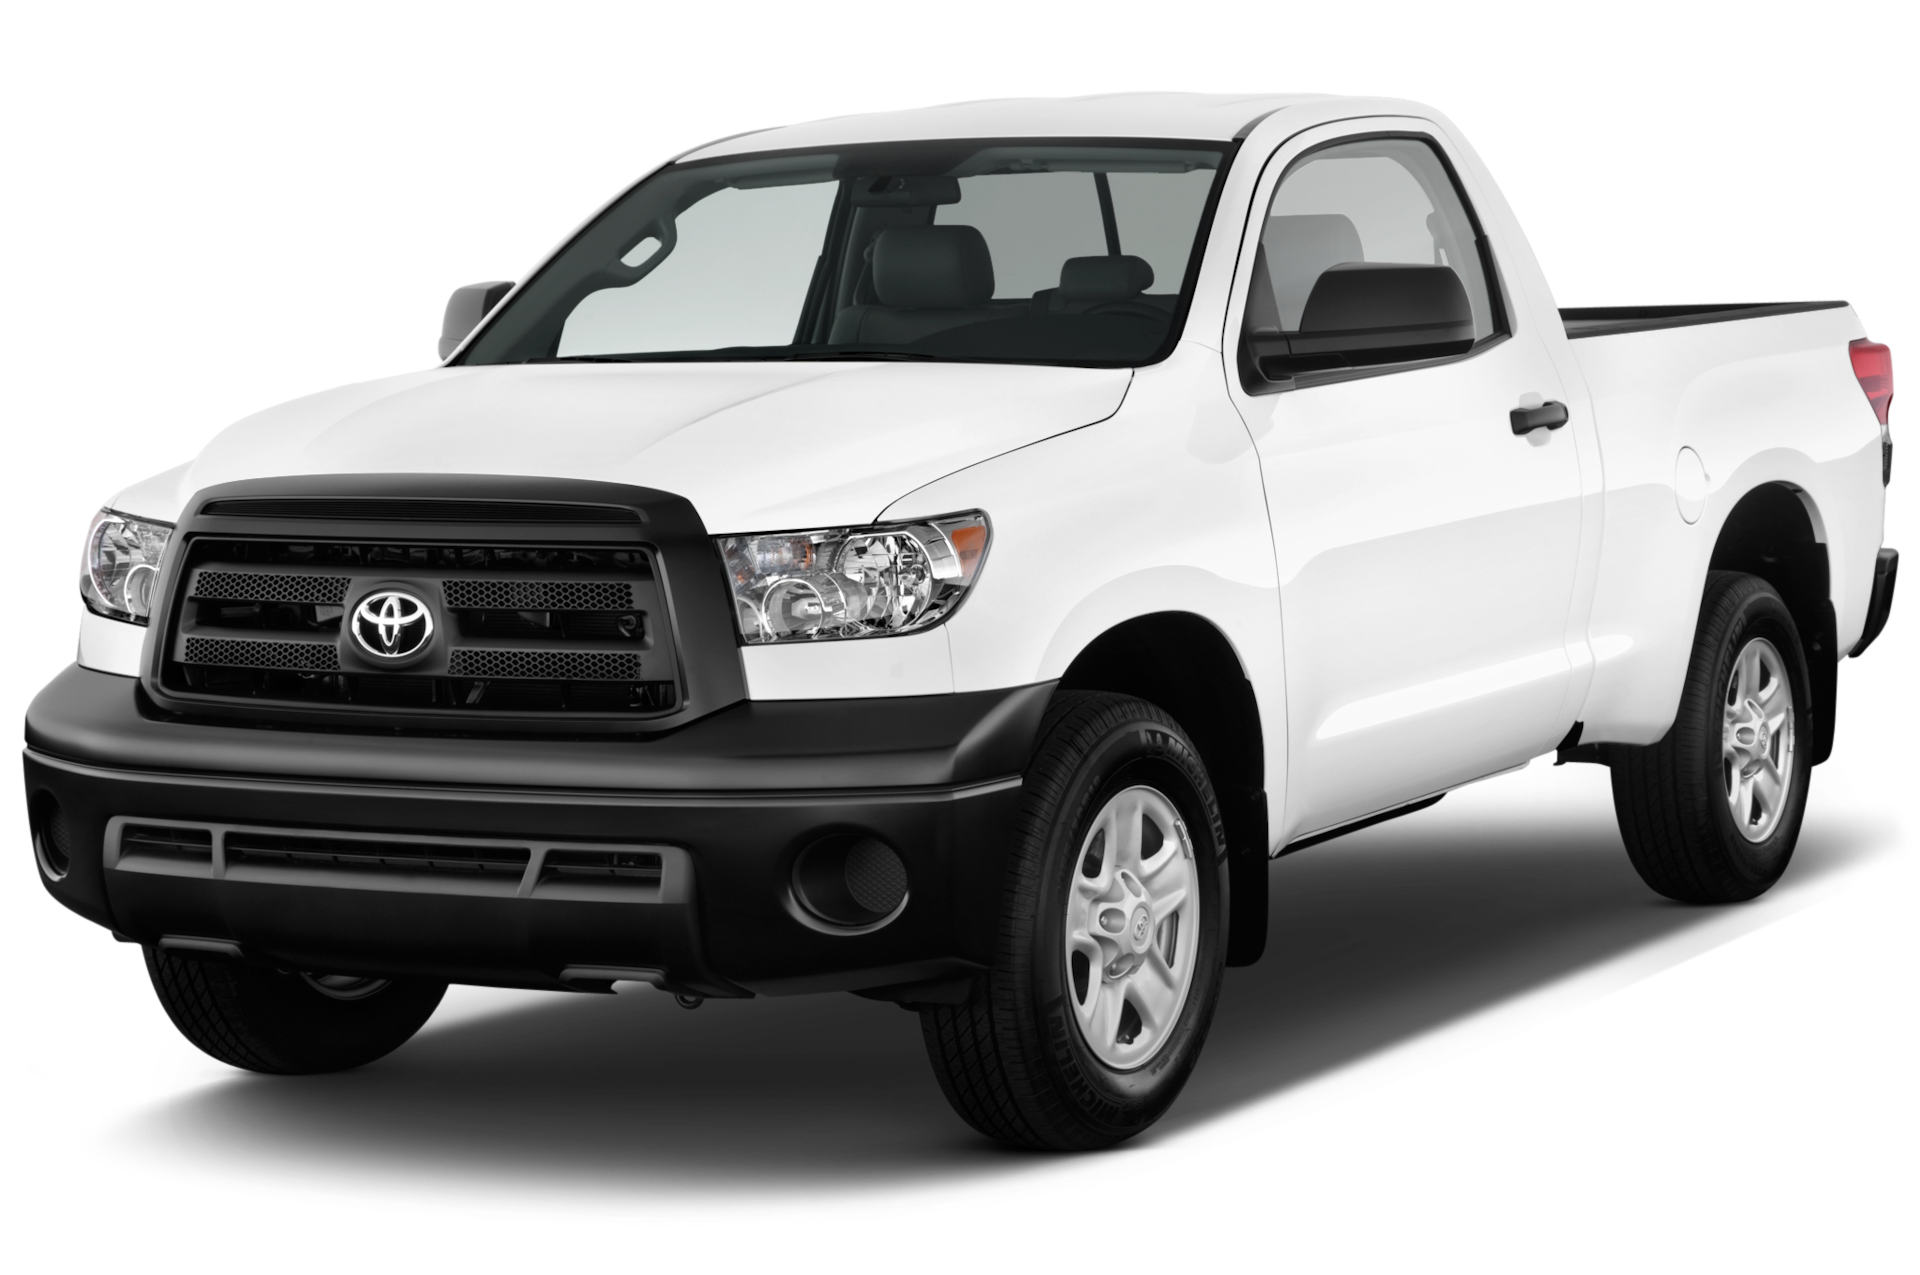 2013 Toyota Tundra Prices, Reviews, and Photos - MotorTrend